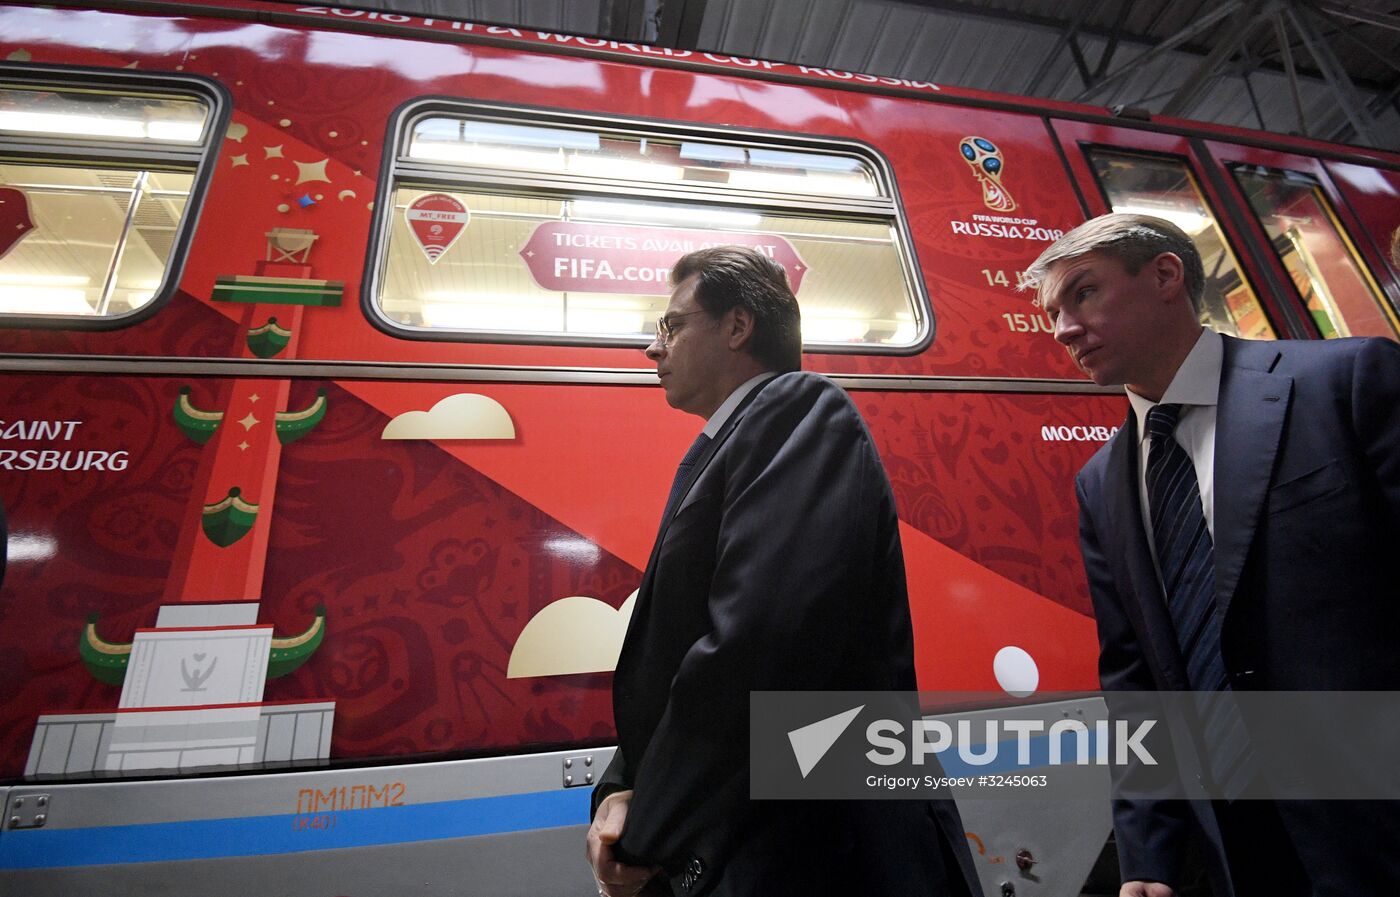 Presentation of official 2018 FIFA World Cup train